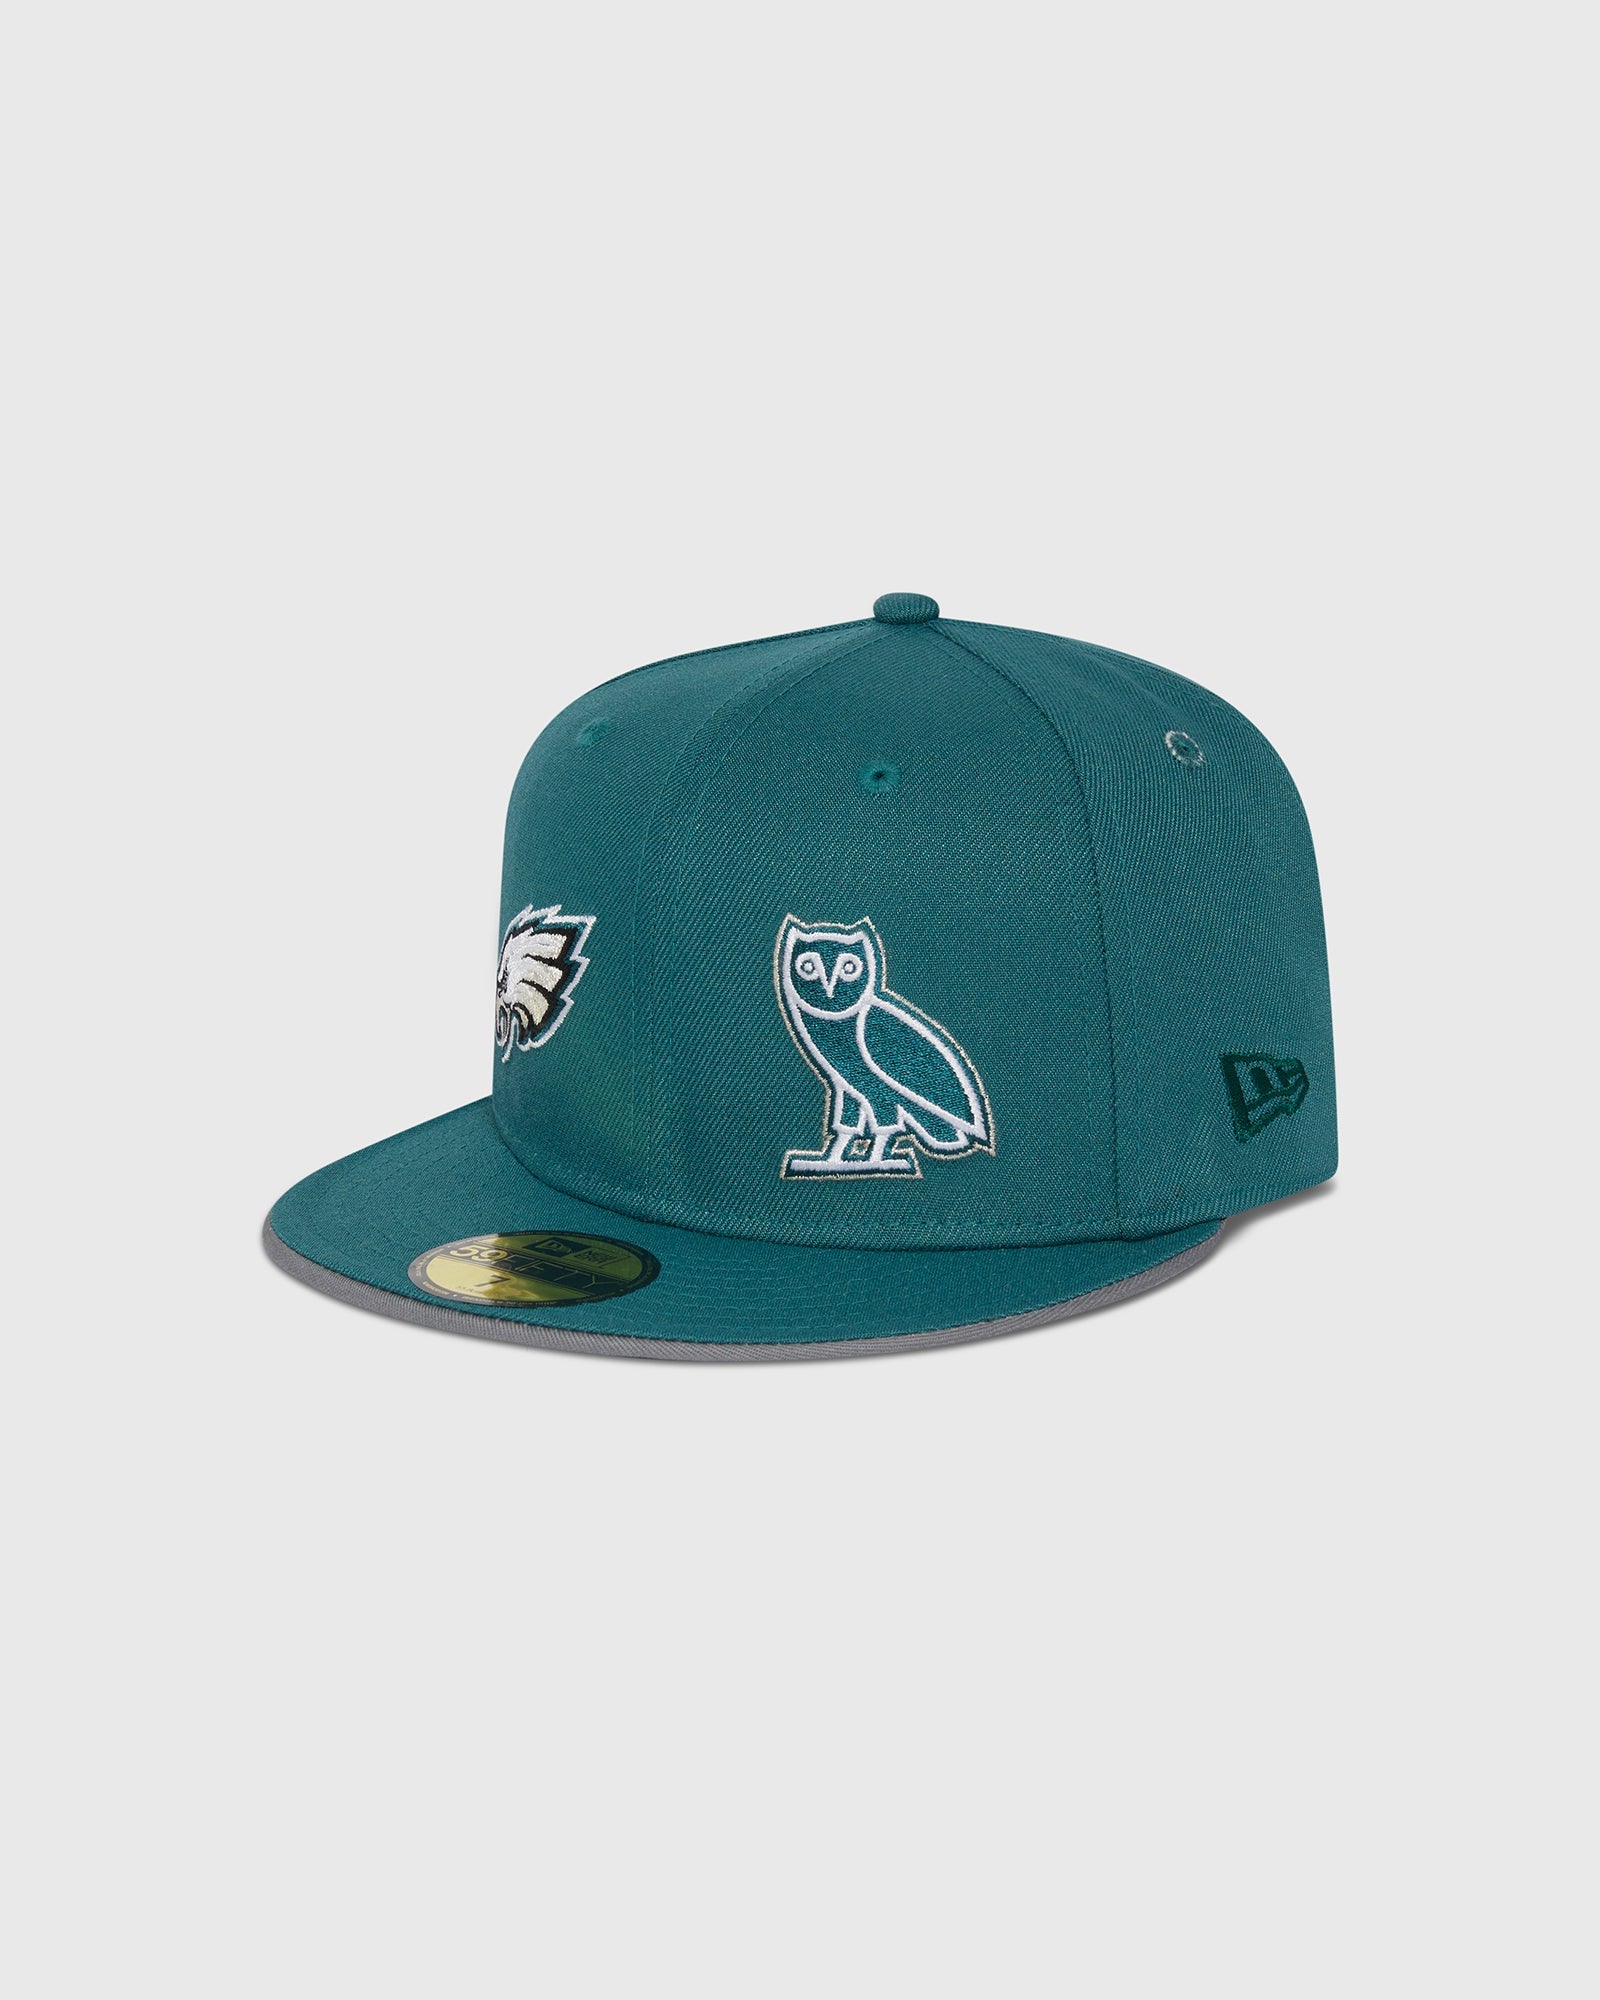 NFL Philadelphia Eagles New Era 59Fifty Fitted Cap - Green IMAGE #6